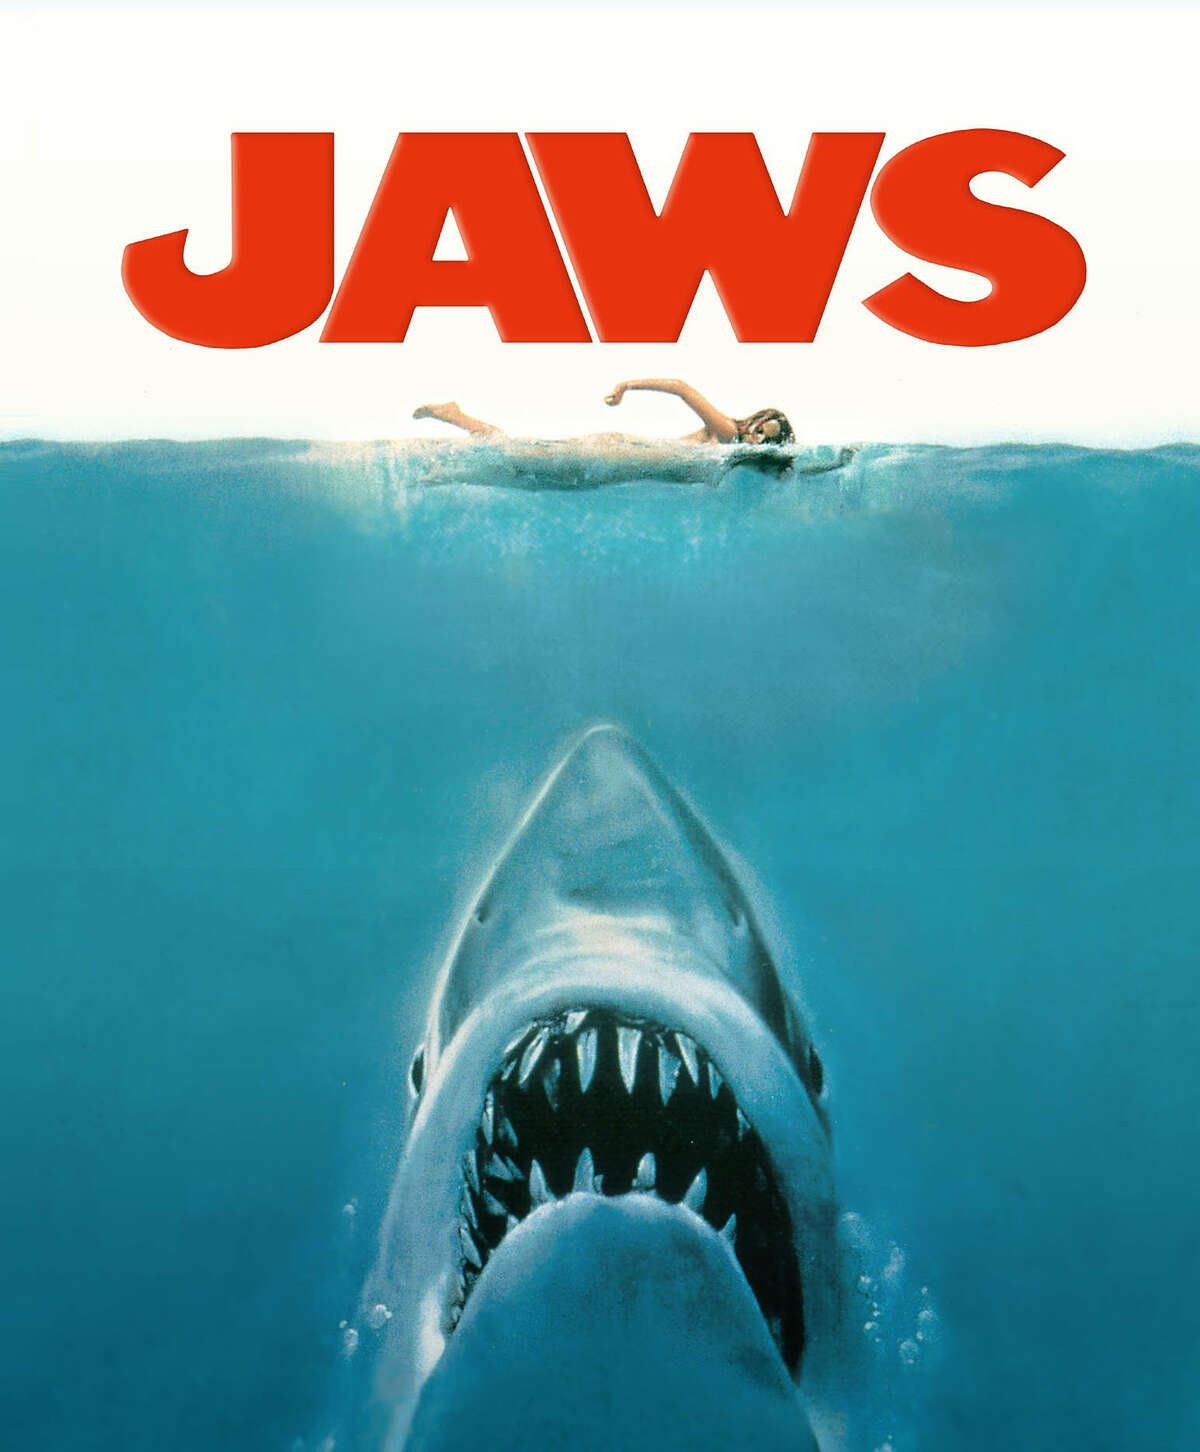 Keith Lockhart will lead the Boston Pops in popular film scores like "Jaws."